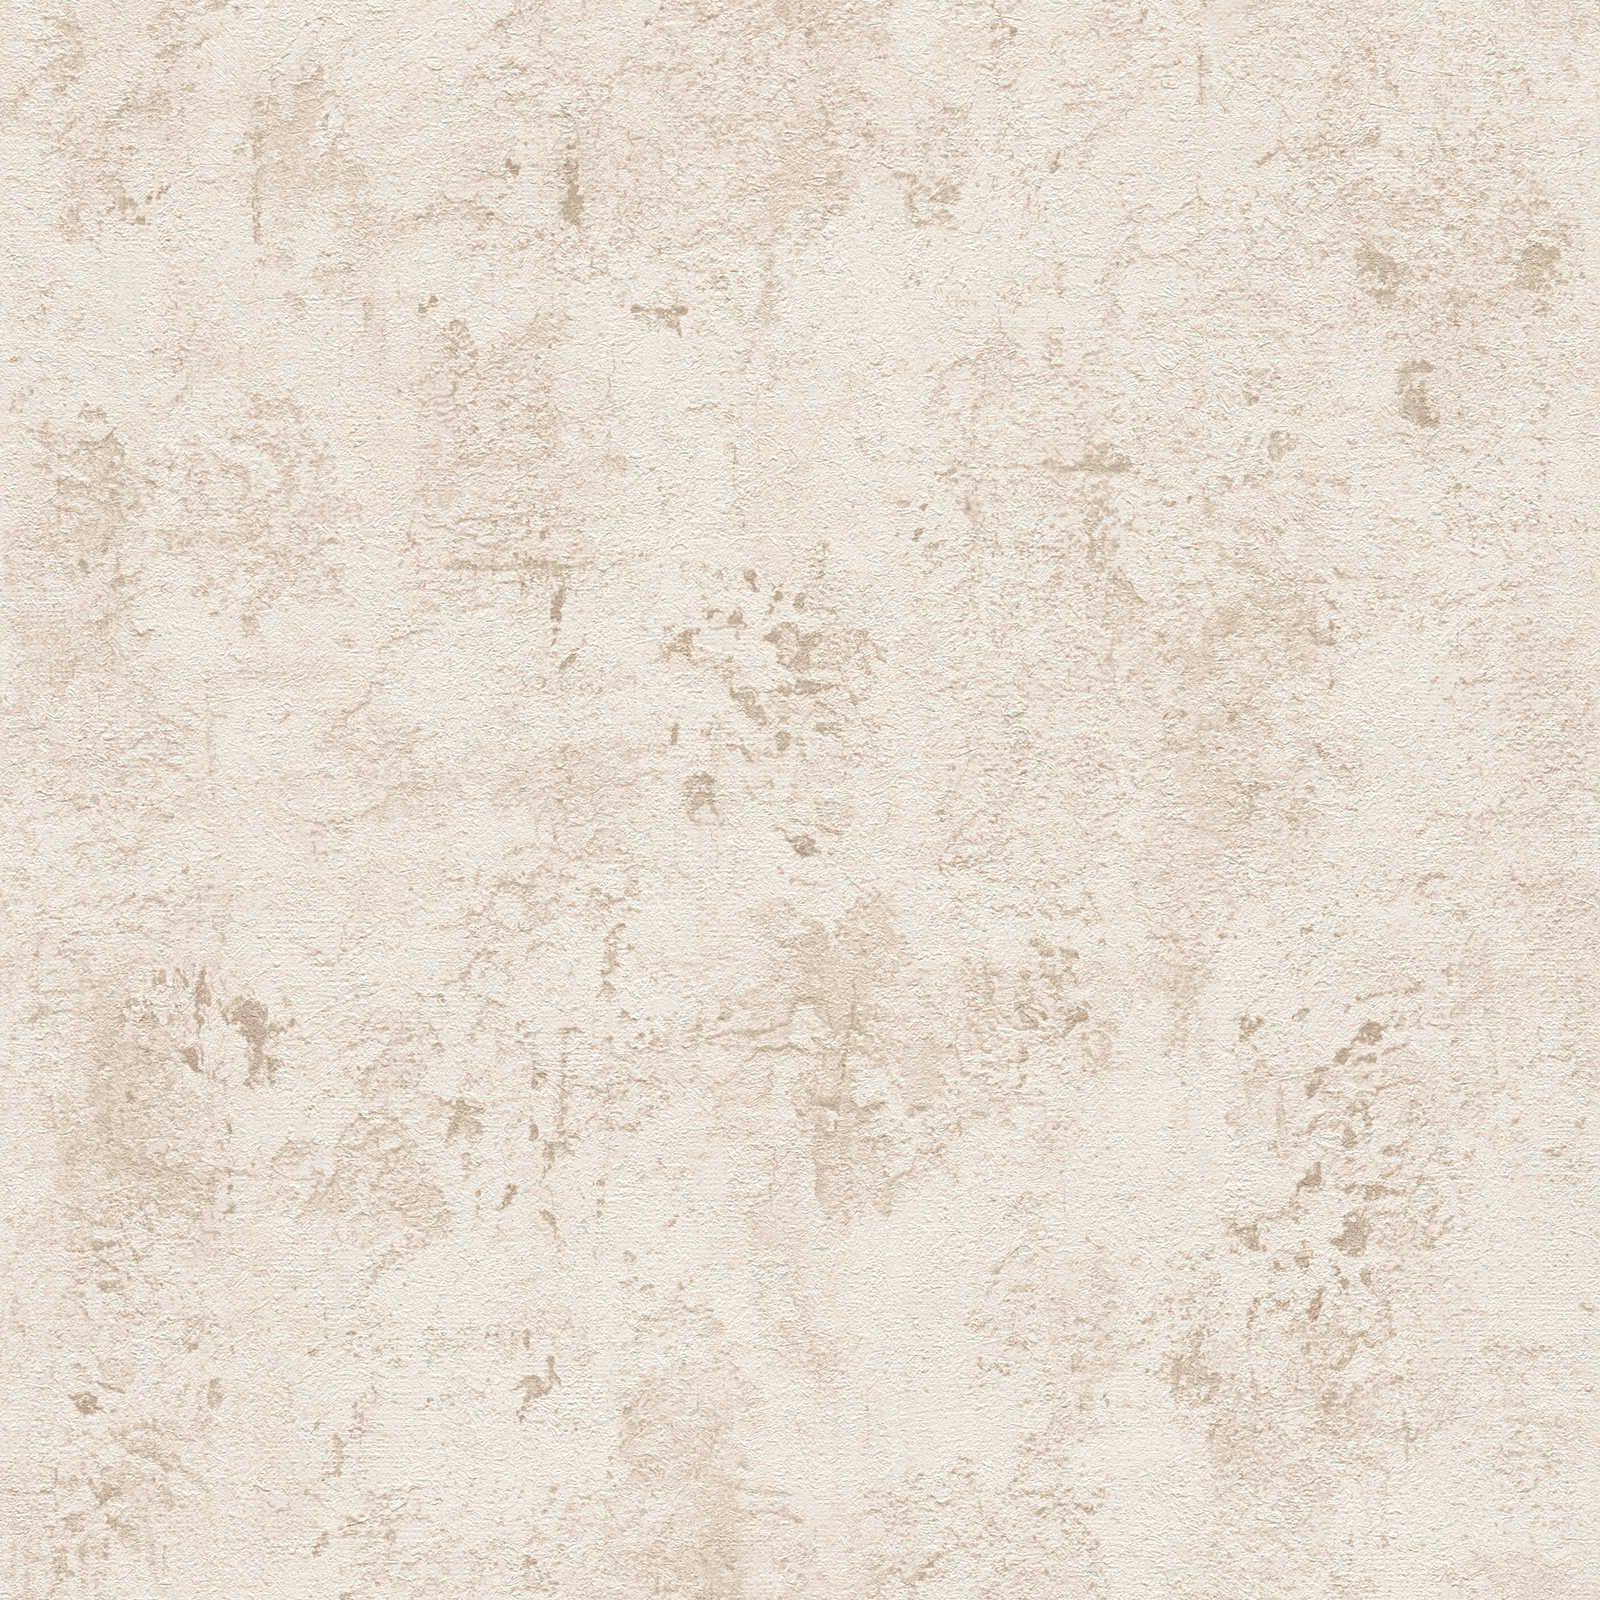 The Bos - Mediterranean Plaster industrial wallpaper AS Creation Roll Light Taupe  388236